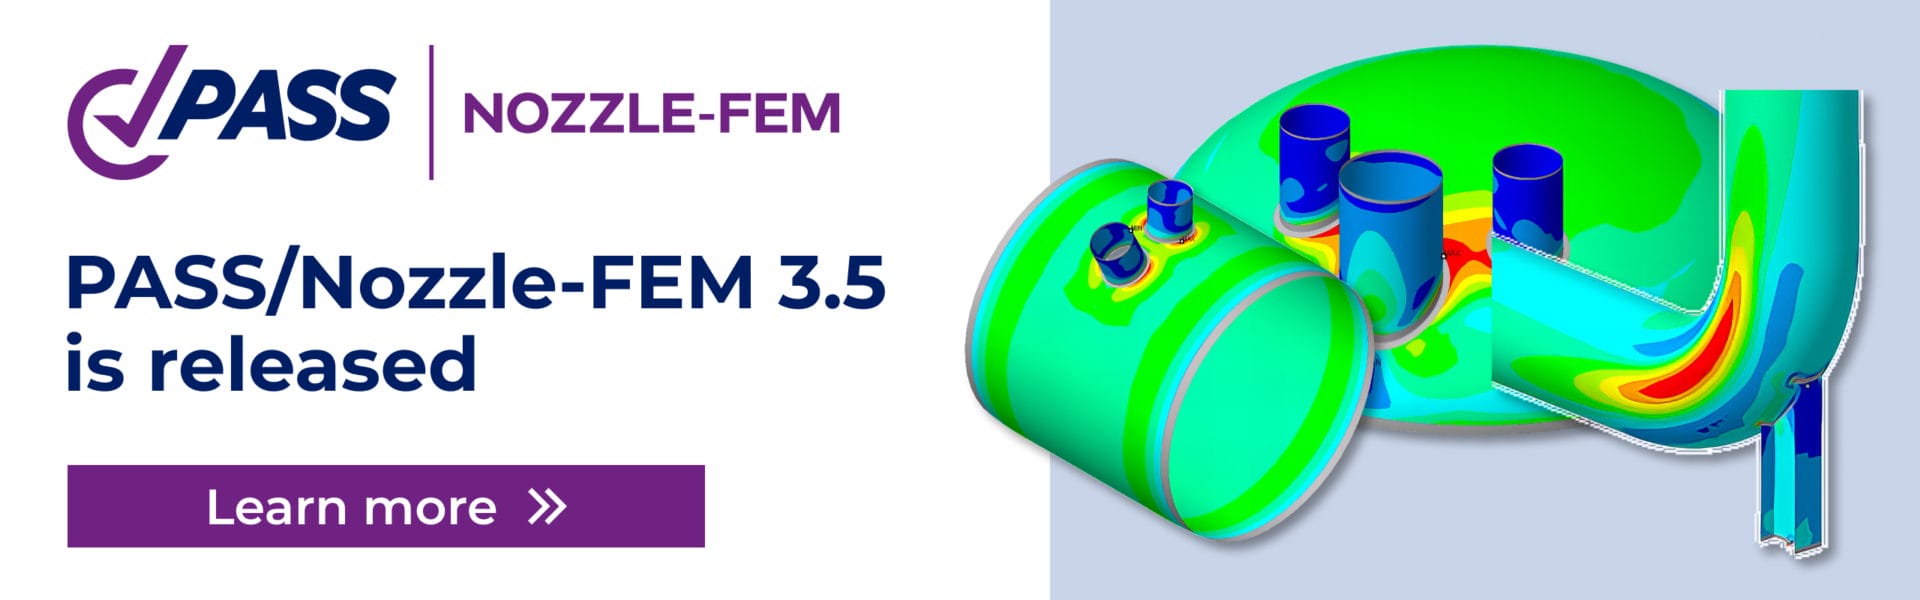 PASS/NOZZLE-FEM 3.5 is released